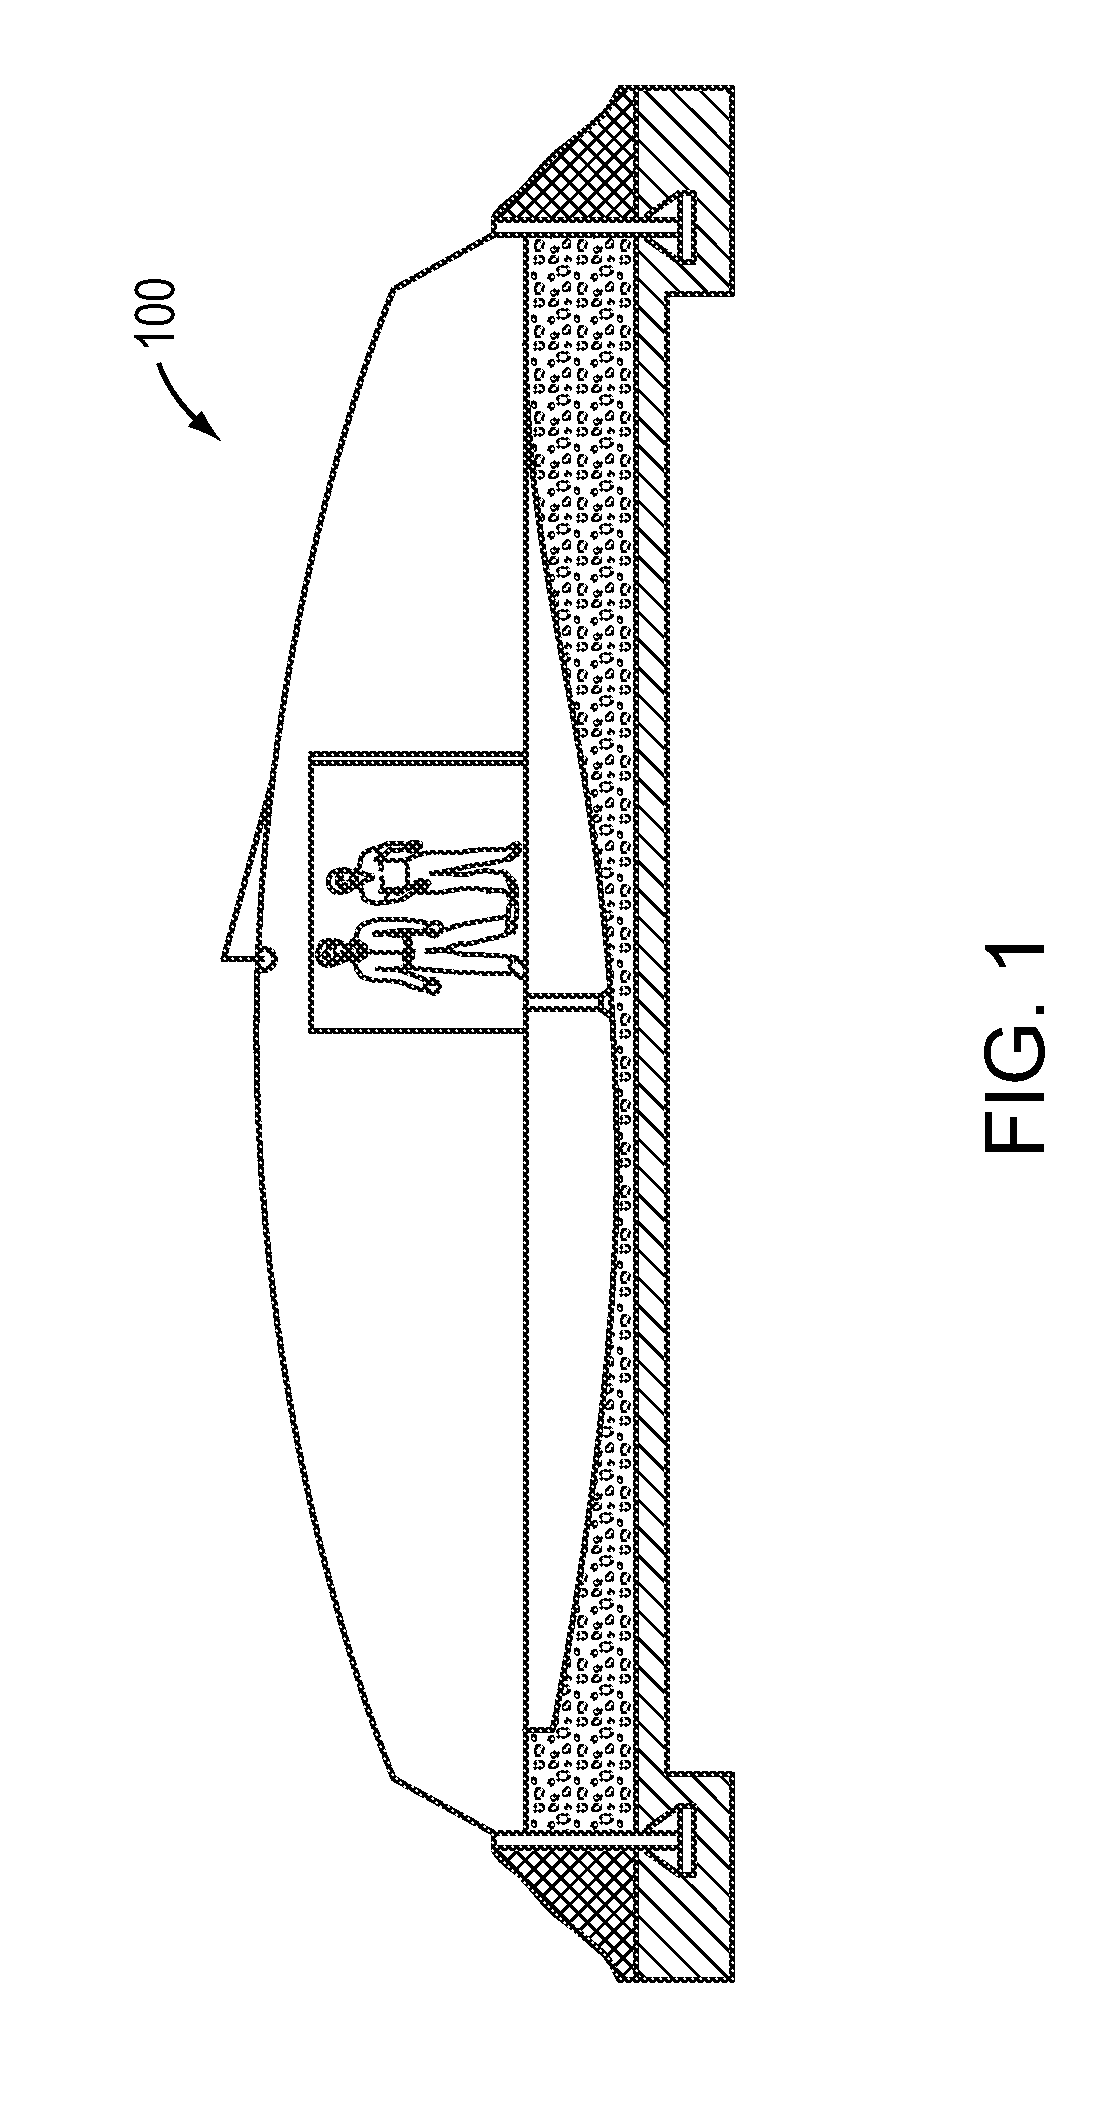 Methods and systems for producing lipids from microalgae using cultured multi-species microalgae